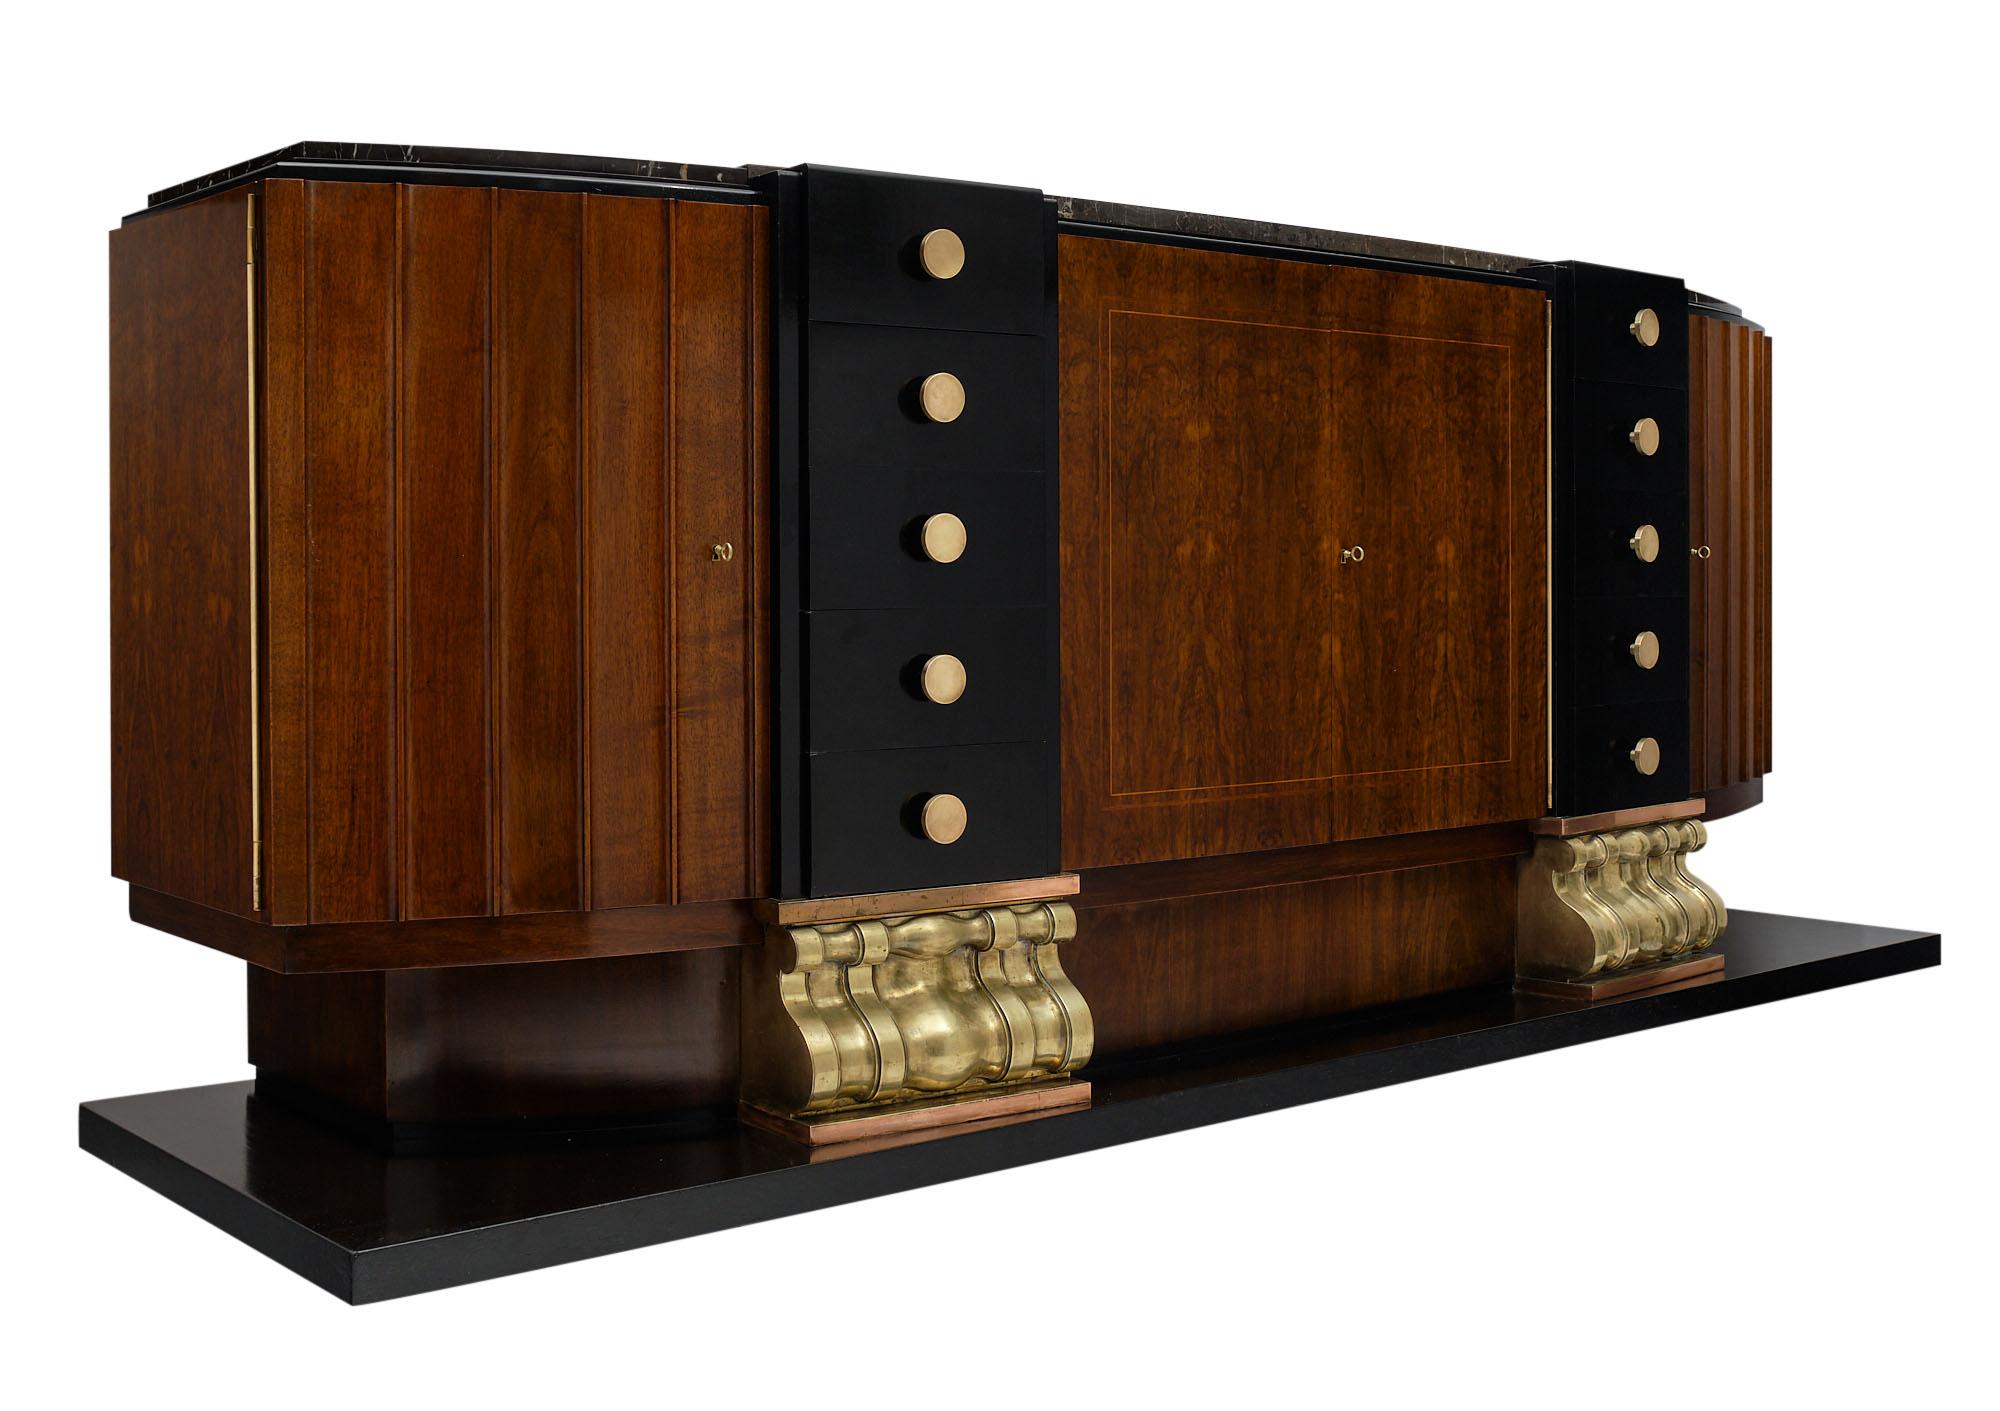 Art Deco buffet from France made of burled walnut and ebonized walnut featuring ample adjustable storage behind four doors. There are ten dovetailed drawers with original bronze hardware. The platform base is enhanced with two important brass feet.